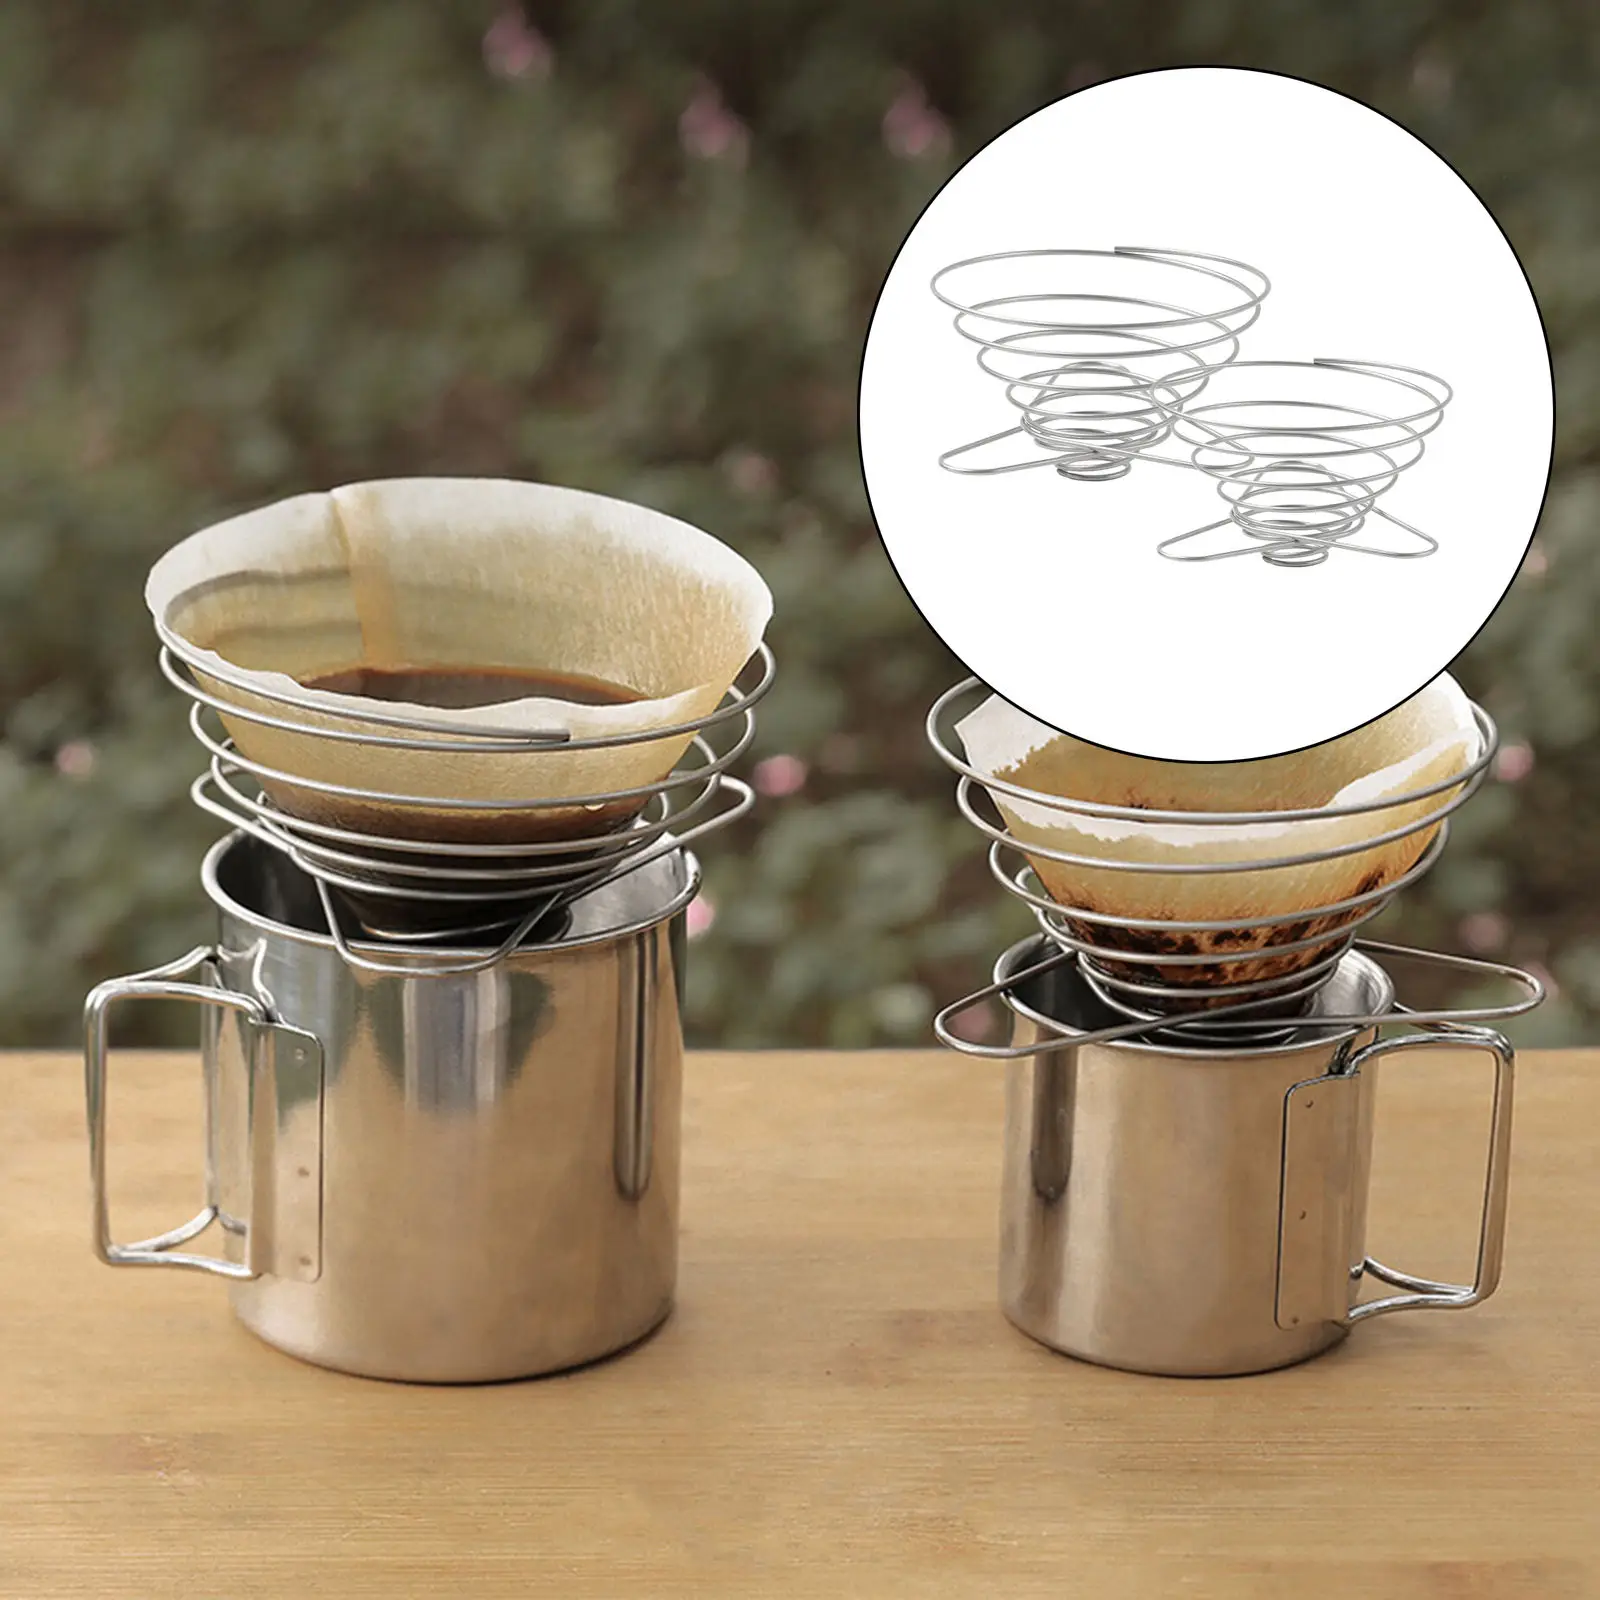 Stainless Steel Pour Over Coffee Dripper Reusable Collapsible Strainer Holder Coffee Maker for Restaurant Camping Travel People